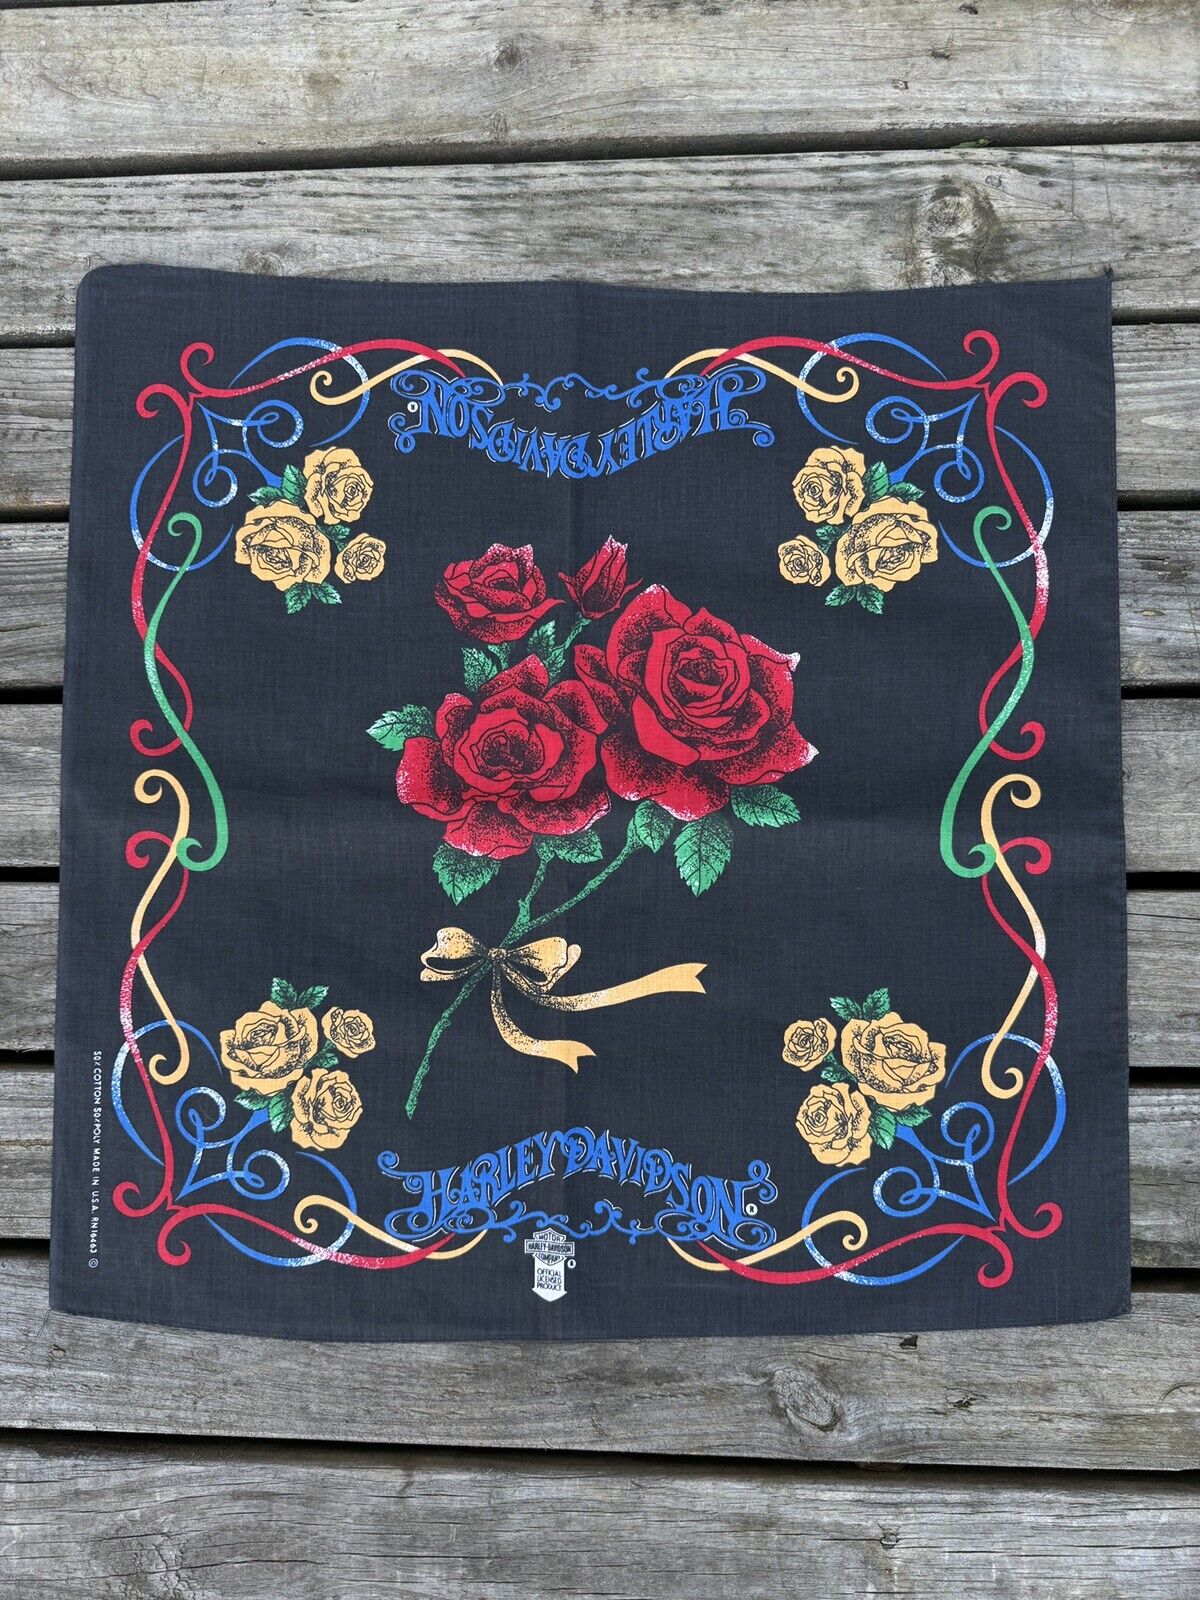 Vintage Harley Davidson Red Roses Bandana 80s - 90s Dead Stock Motorcycle Scarf